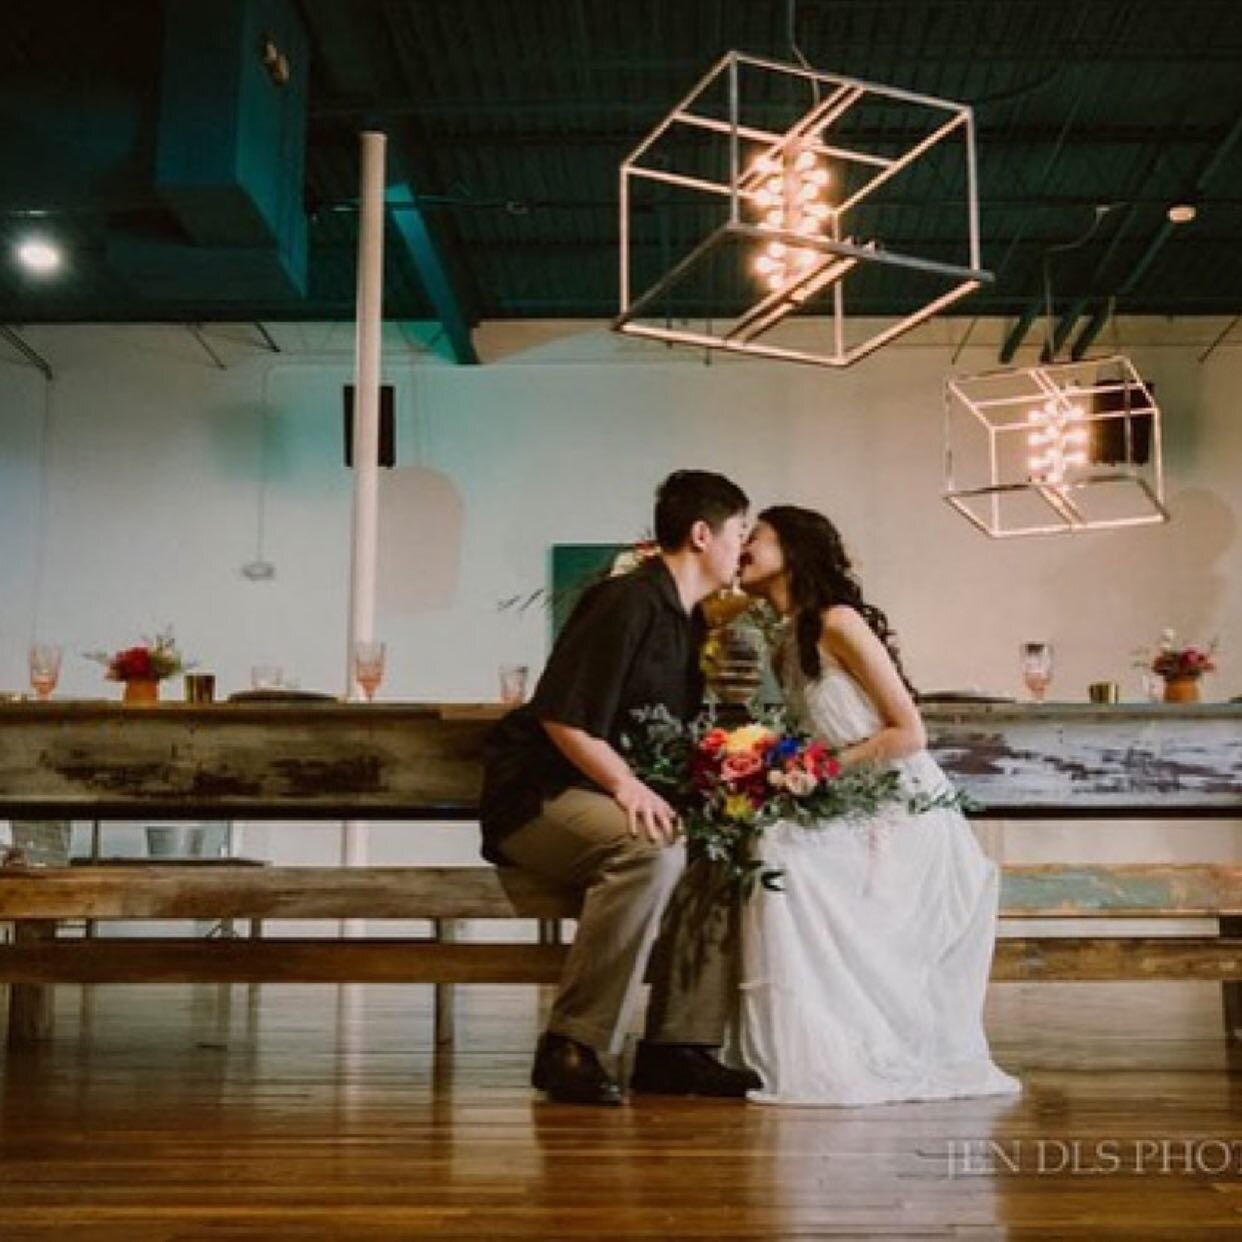 Monday magic. What&rsquo;s better than being present with the person who you get to make a life with. 
.
Repost from @jendlsphoto
&bull;
Perfect venue for an intimate wedding. 

Venue: @studiobhtx
Coordinator: @moonstruckeventstx
Hair/Make-up: @bella